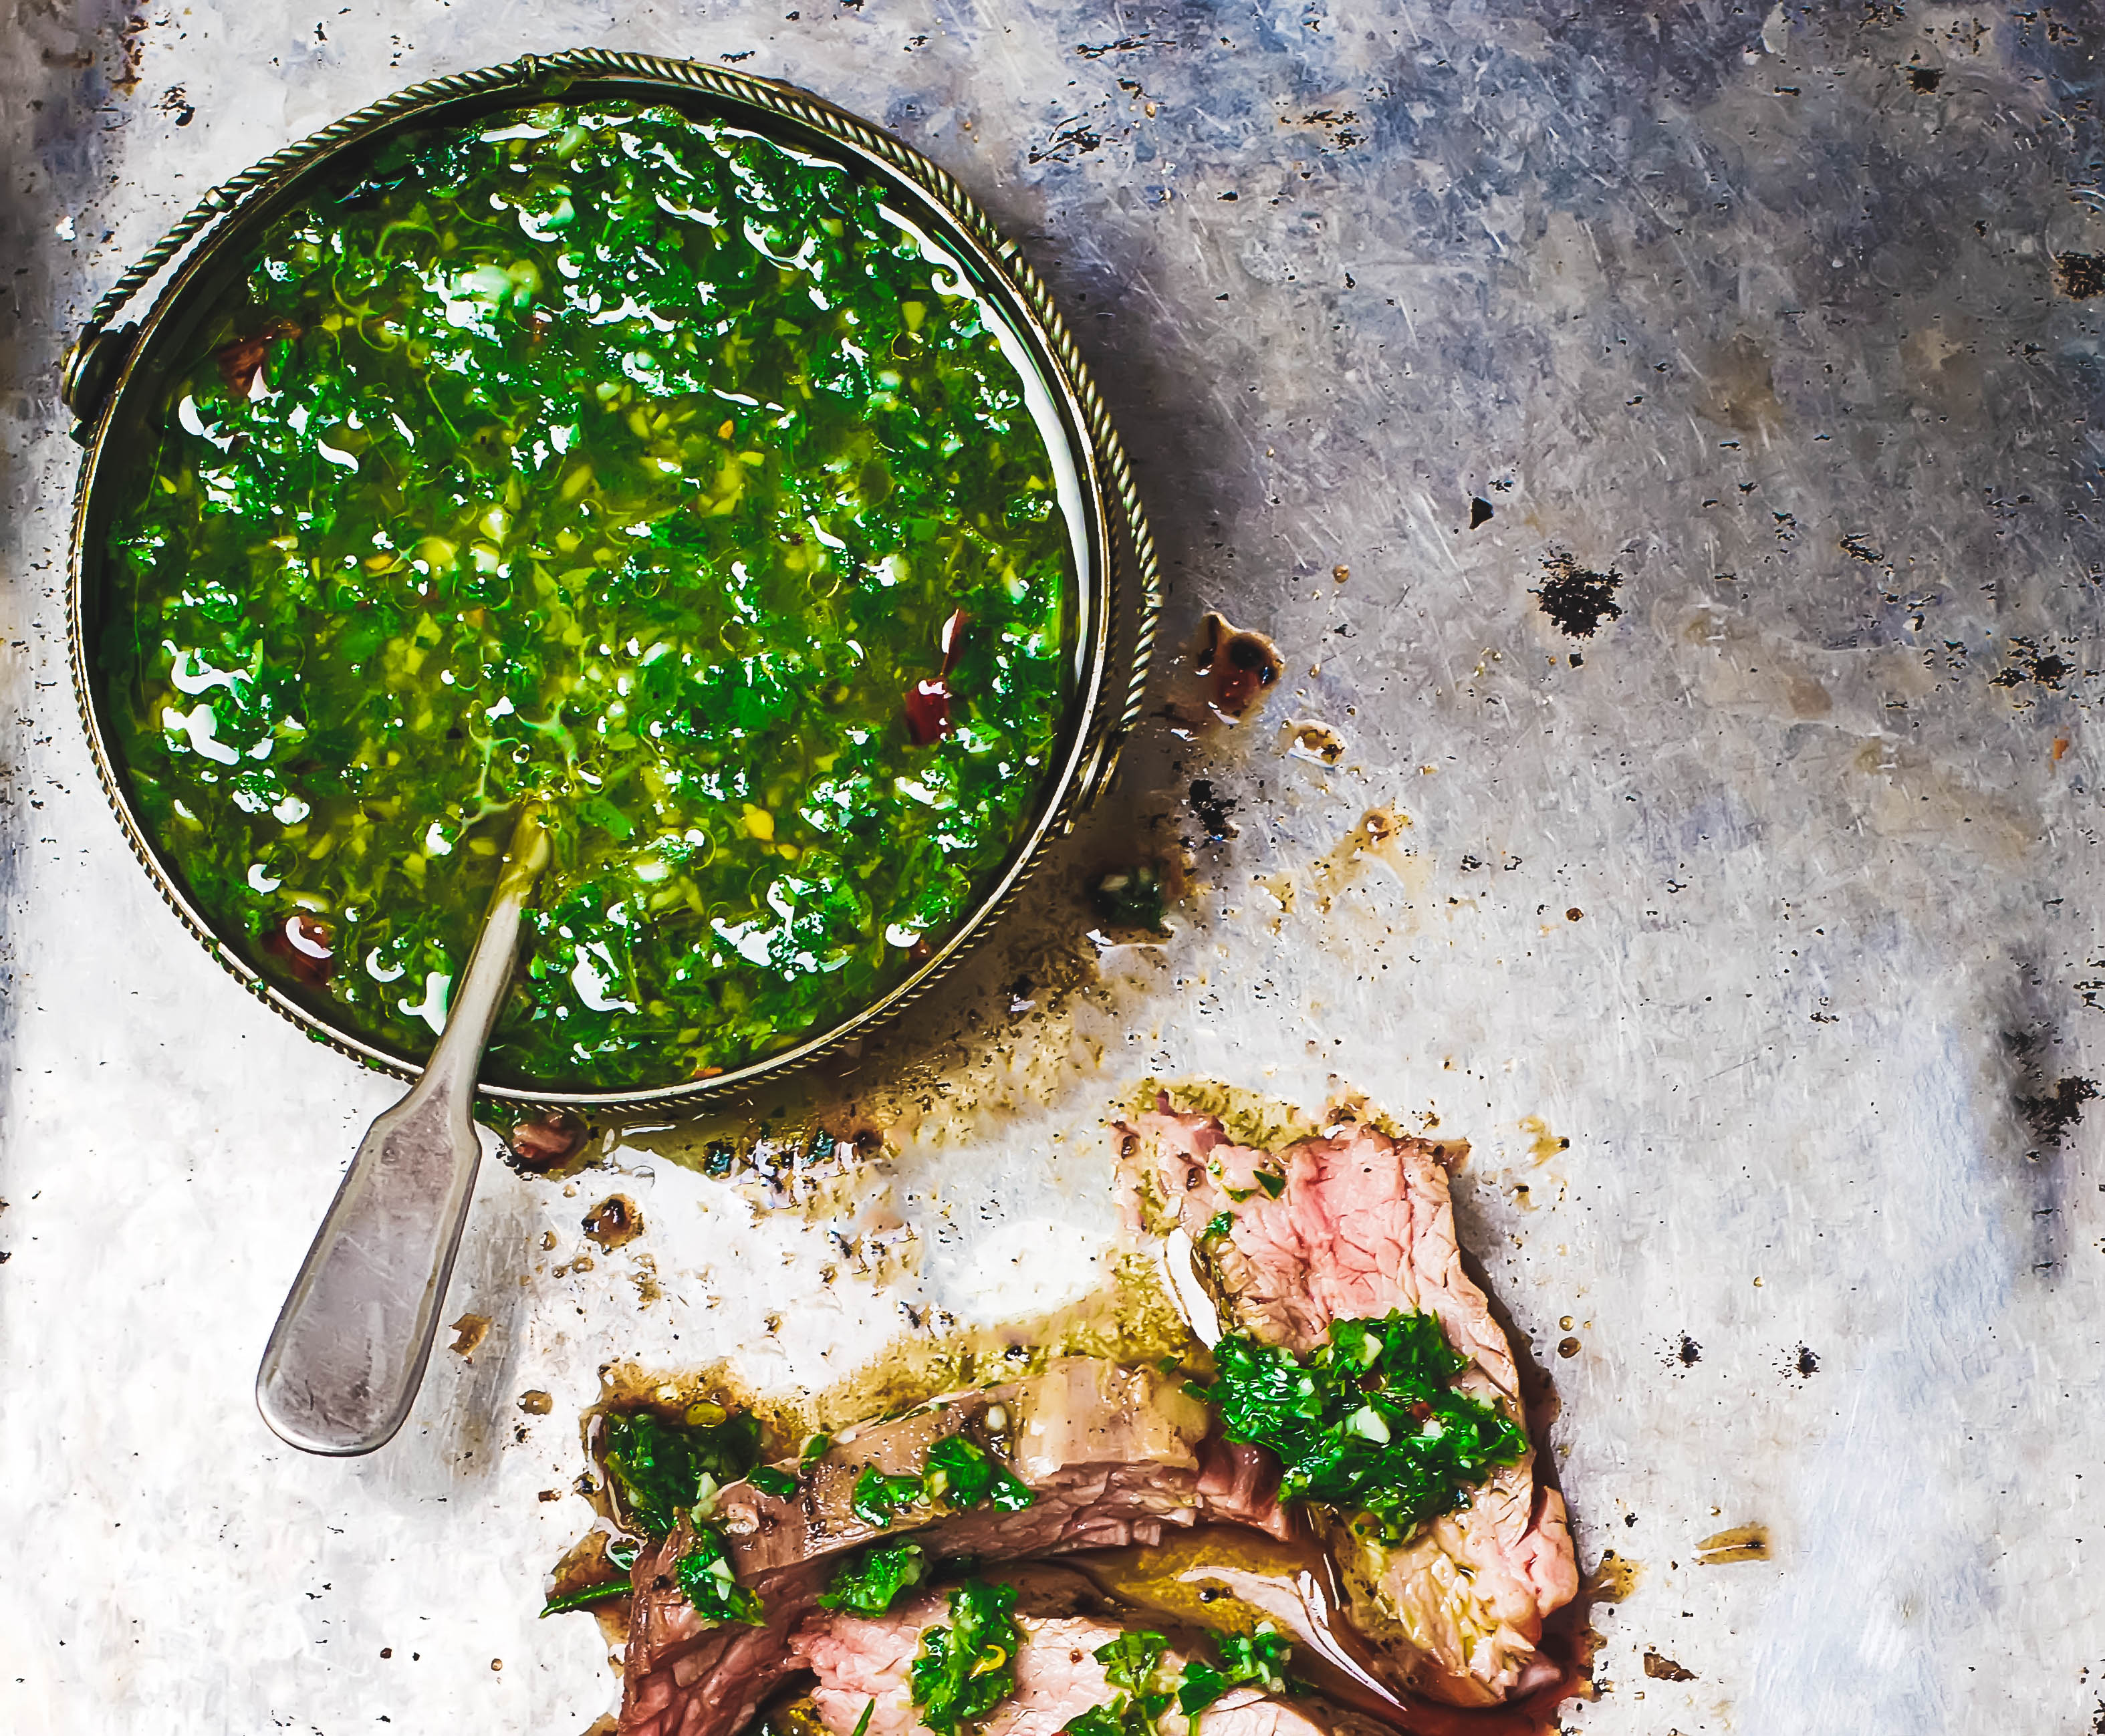 Skillet-Cooked NY Strip Steak with Chimichurri Sauce is ideal for a special occasion meal. Skillet-Cooked NY Strip Steak with Chimichurri Sauce is a lovely dish to serve your loved ones.